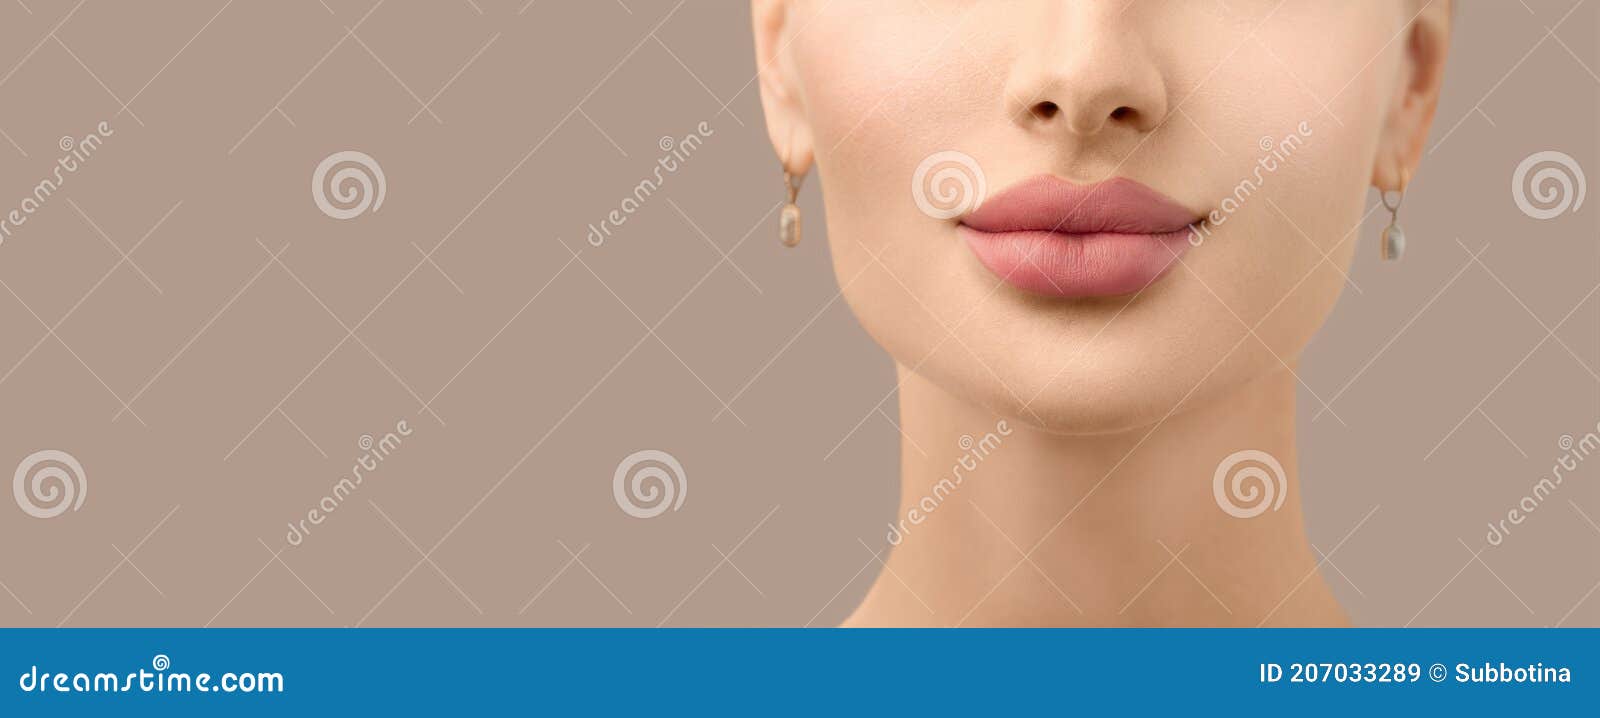 beautiful young model face closeup. lip filler injections. fillers. lip augmentation. perfect lips with hyaluronic acid